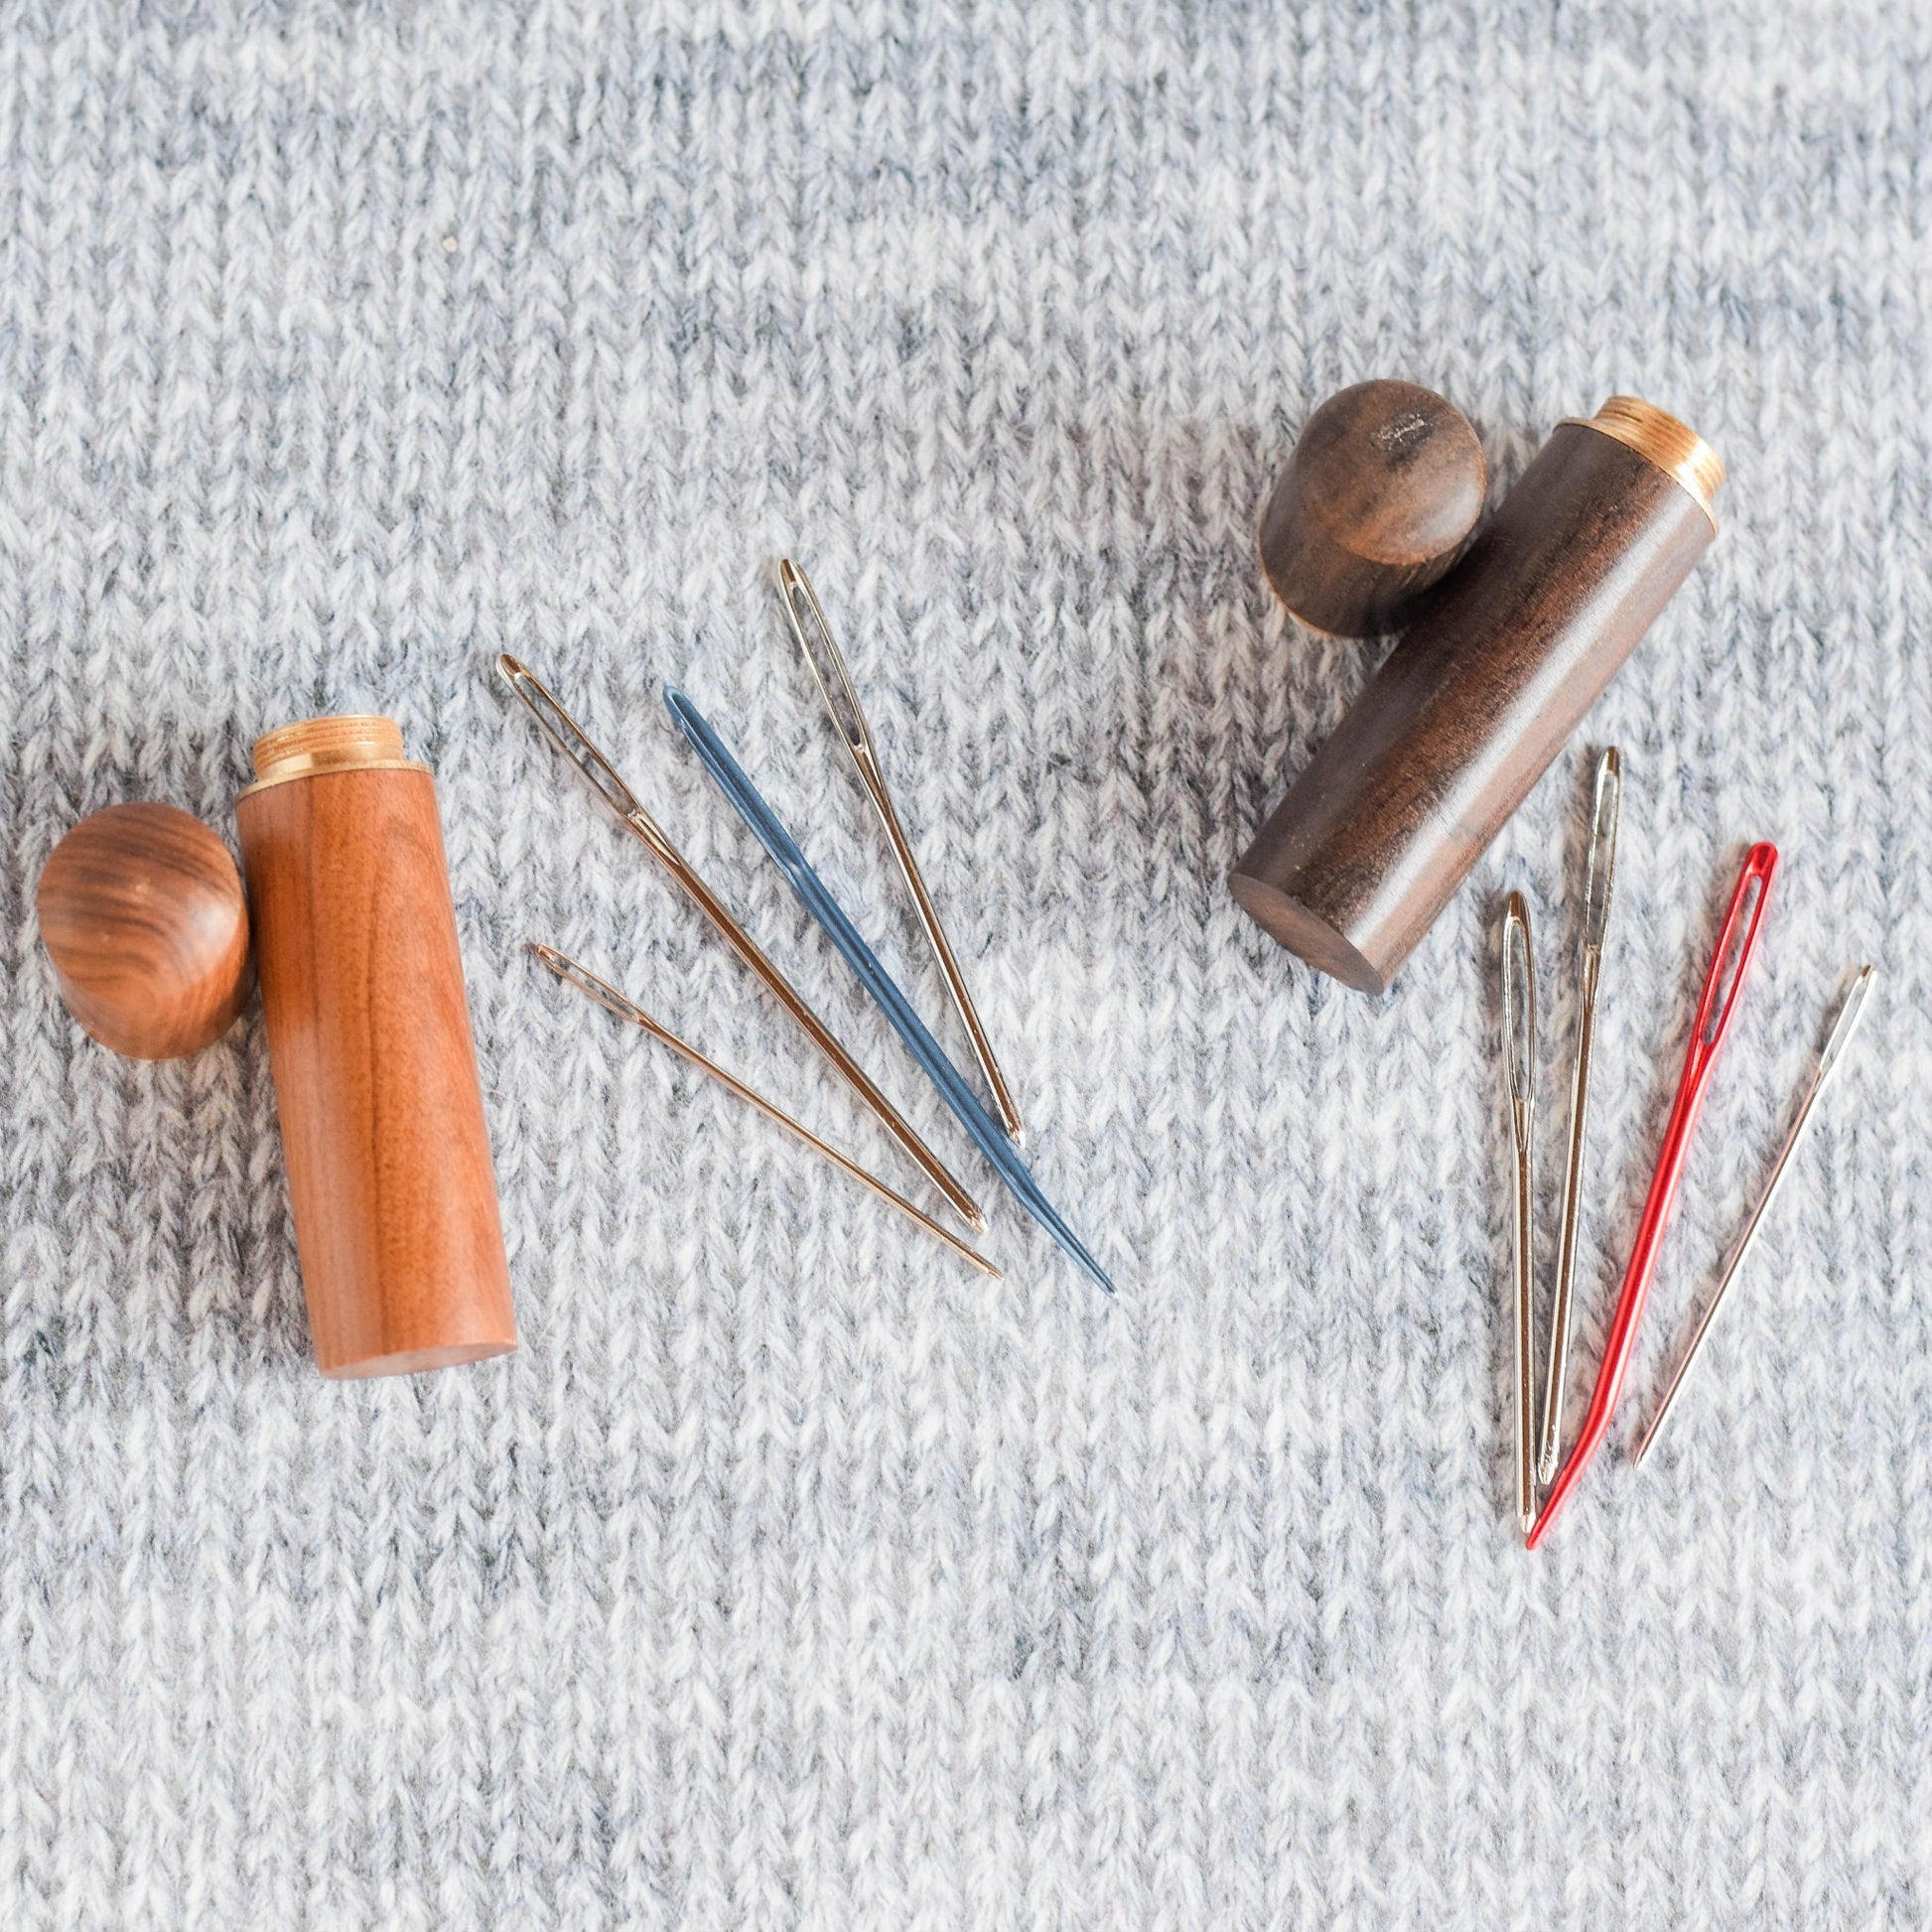 Wooden Tapestry Needle Case with Darning Needles, Bent Needle, Storage Case, Wood Case, Darning Needles for Knitting and Crochet